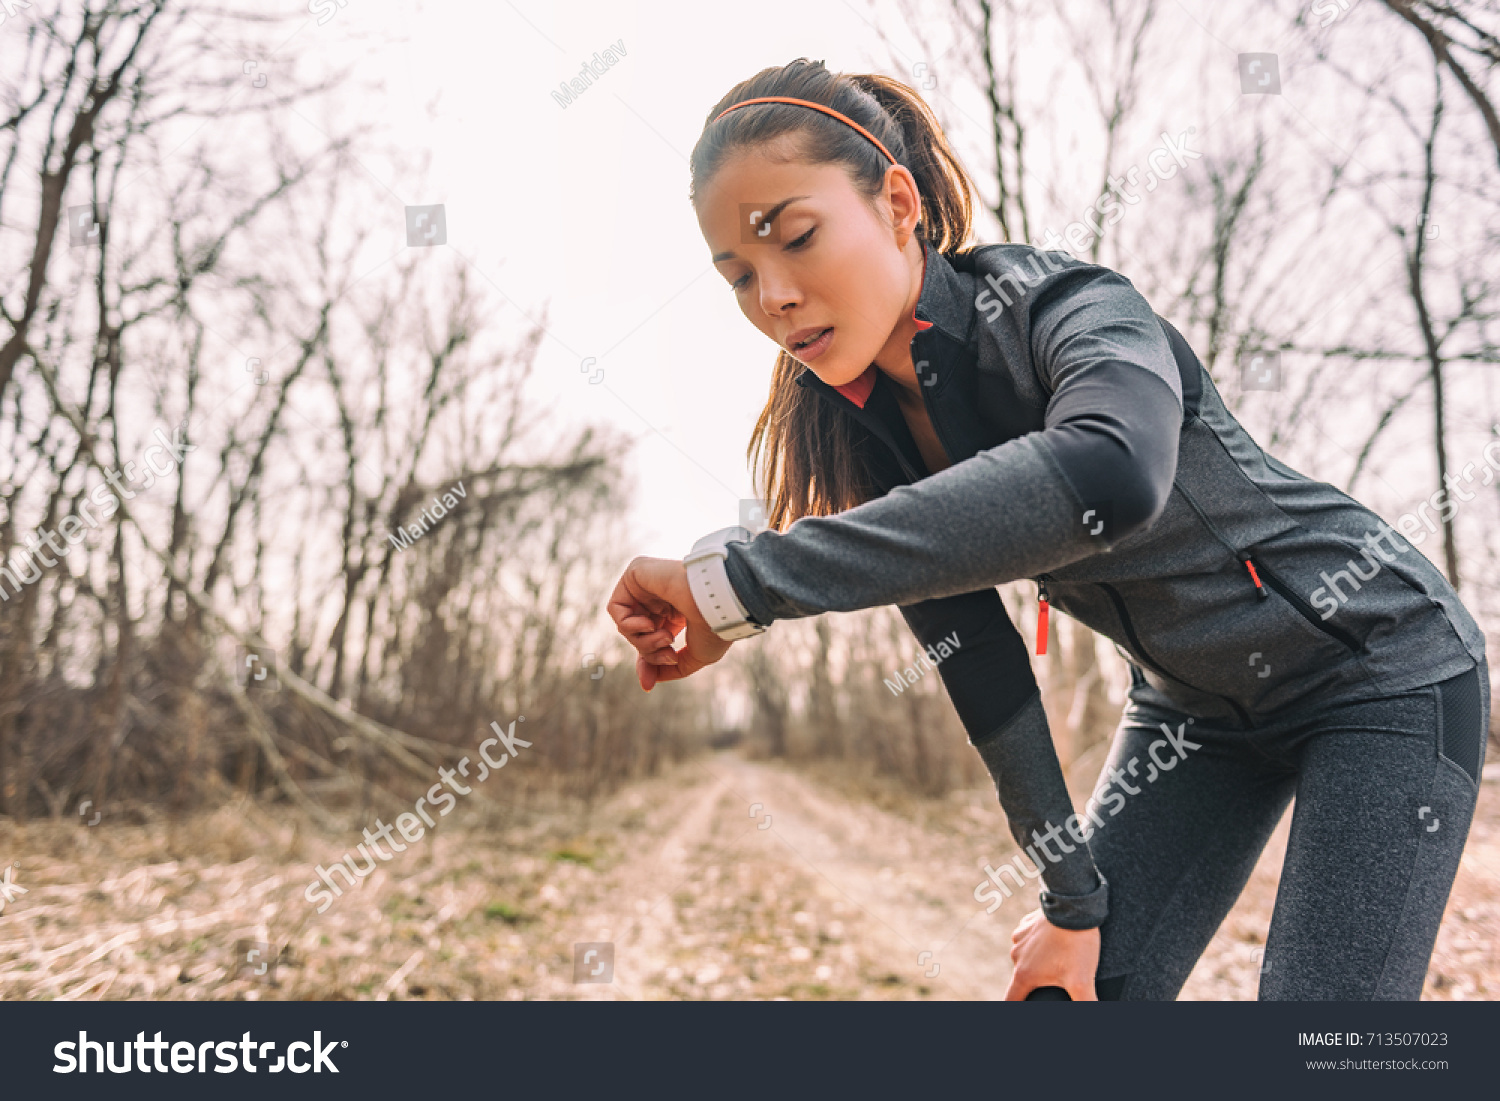 Sport watch run woman checking smartwatch tracker. Trail running runner girl looking at heart rate monitor smart watch in forest wearing jacket sportswear. Female athlete jogger training in woods. #713507023